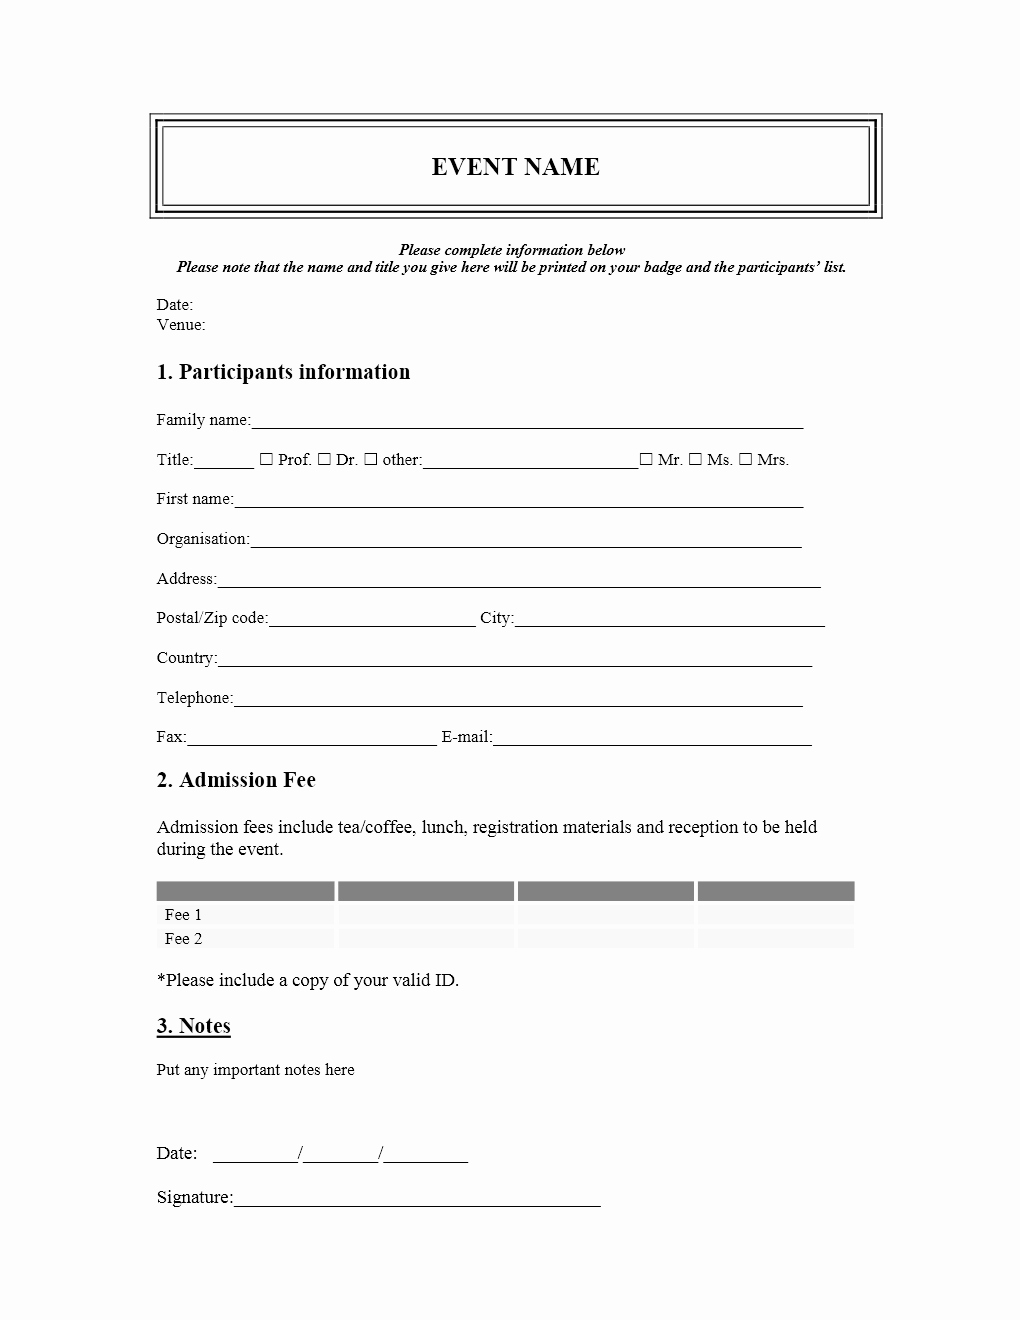 Free Registration forms Template Awesome event Registration form